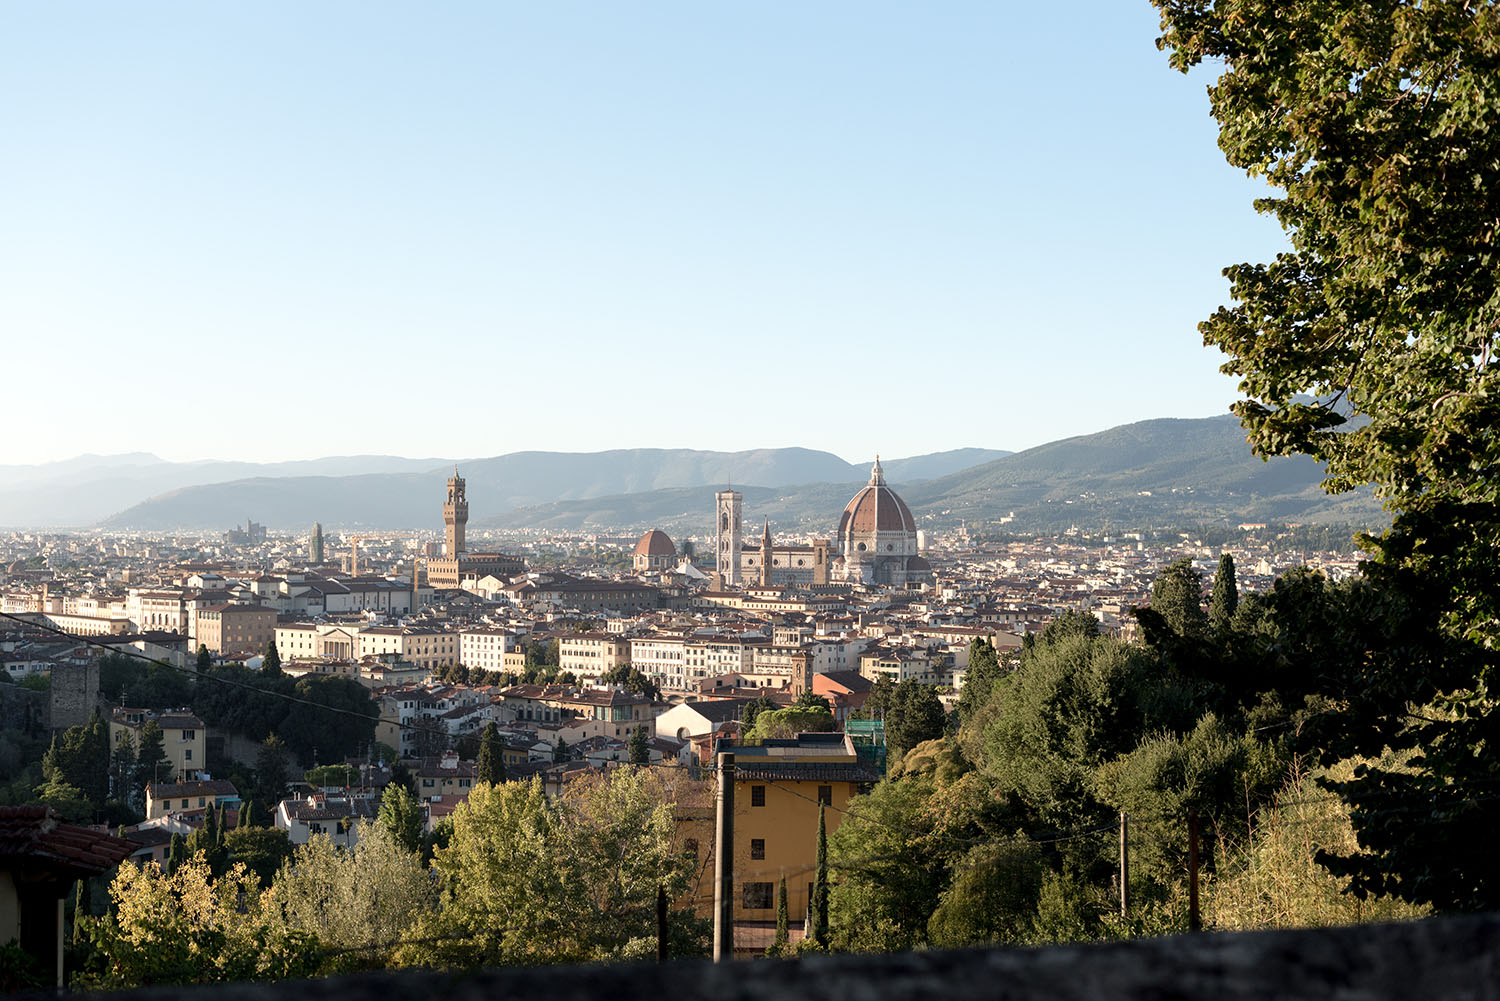 A view of Florence from the top of Piazzale Michelangelo, as captured by top Canadian travel blogger Cee Fardoe of Coco & Vera